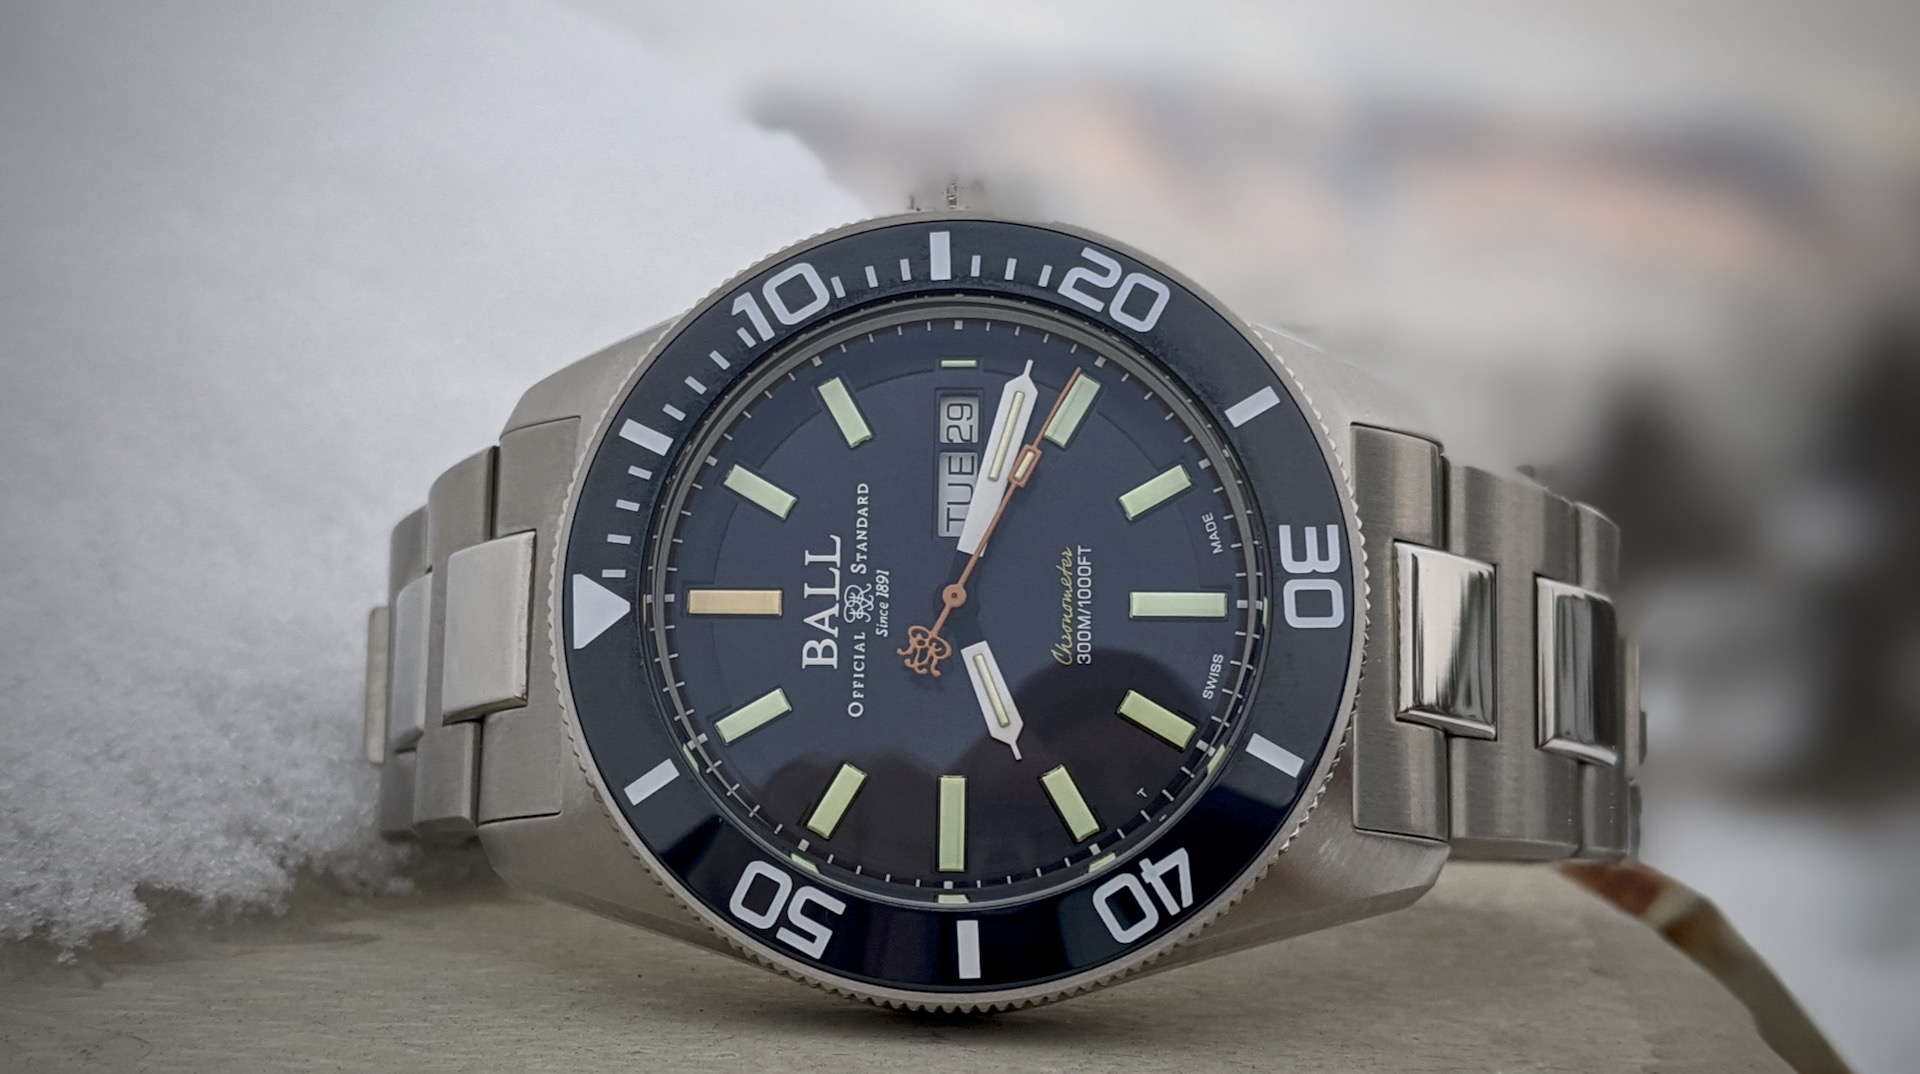 BALL Engineer Master II Skindiver Heritage Watch Review